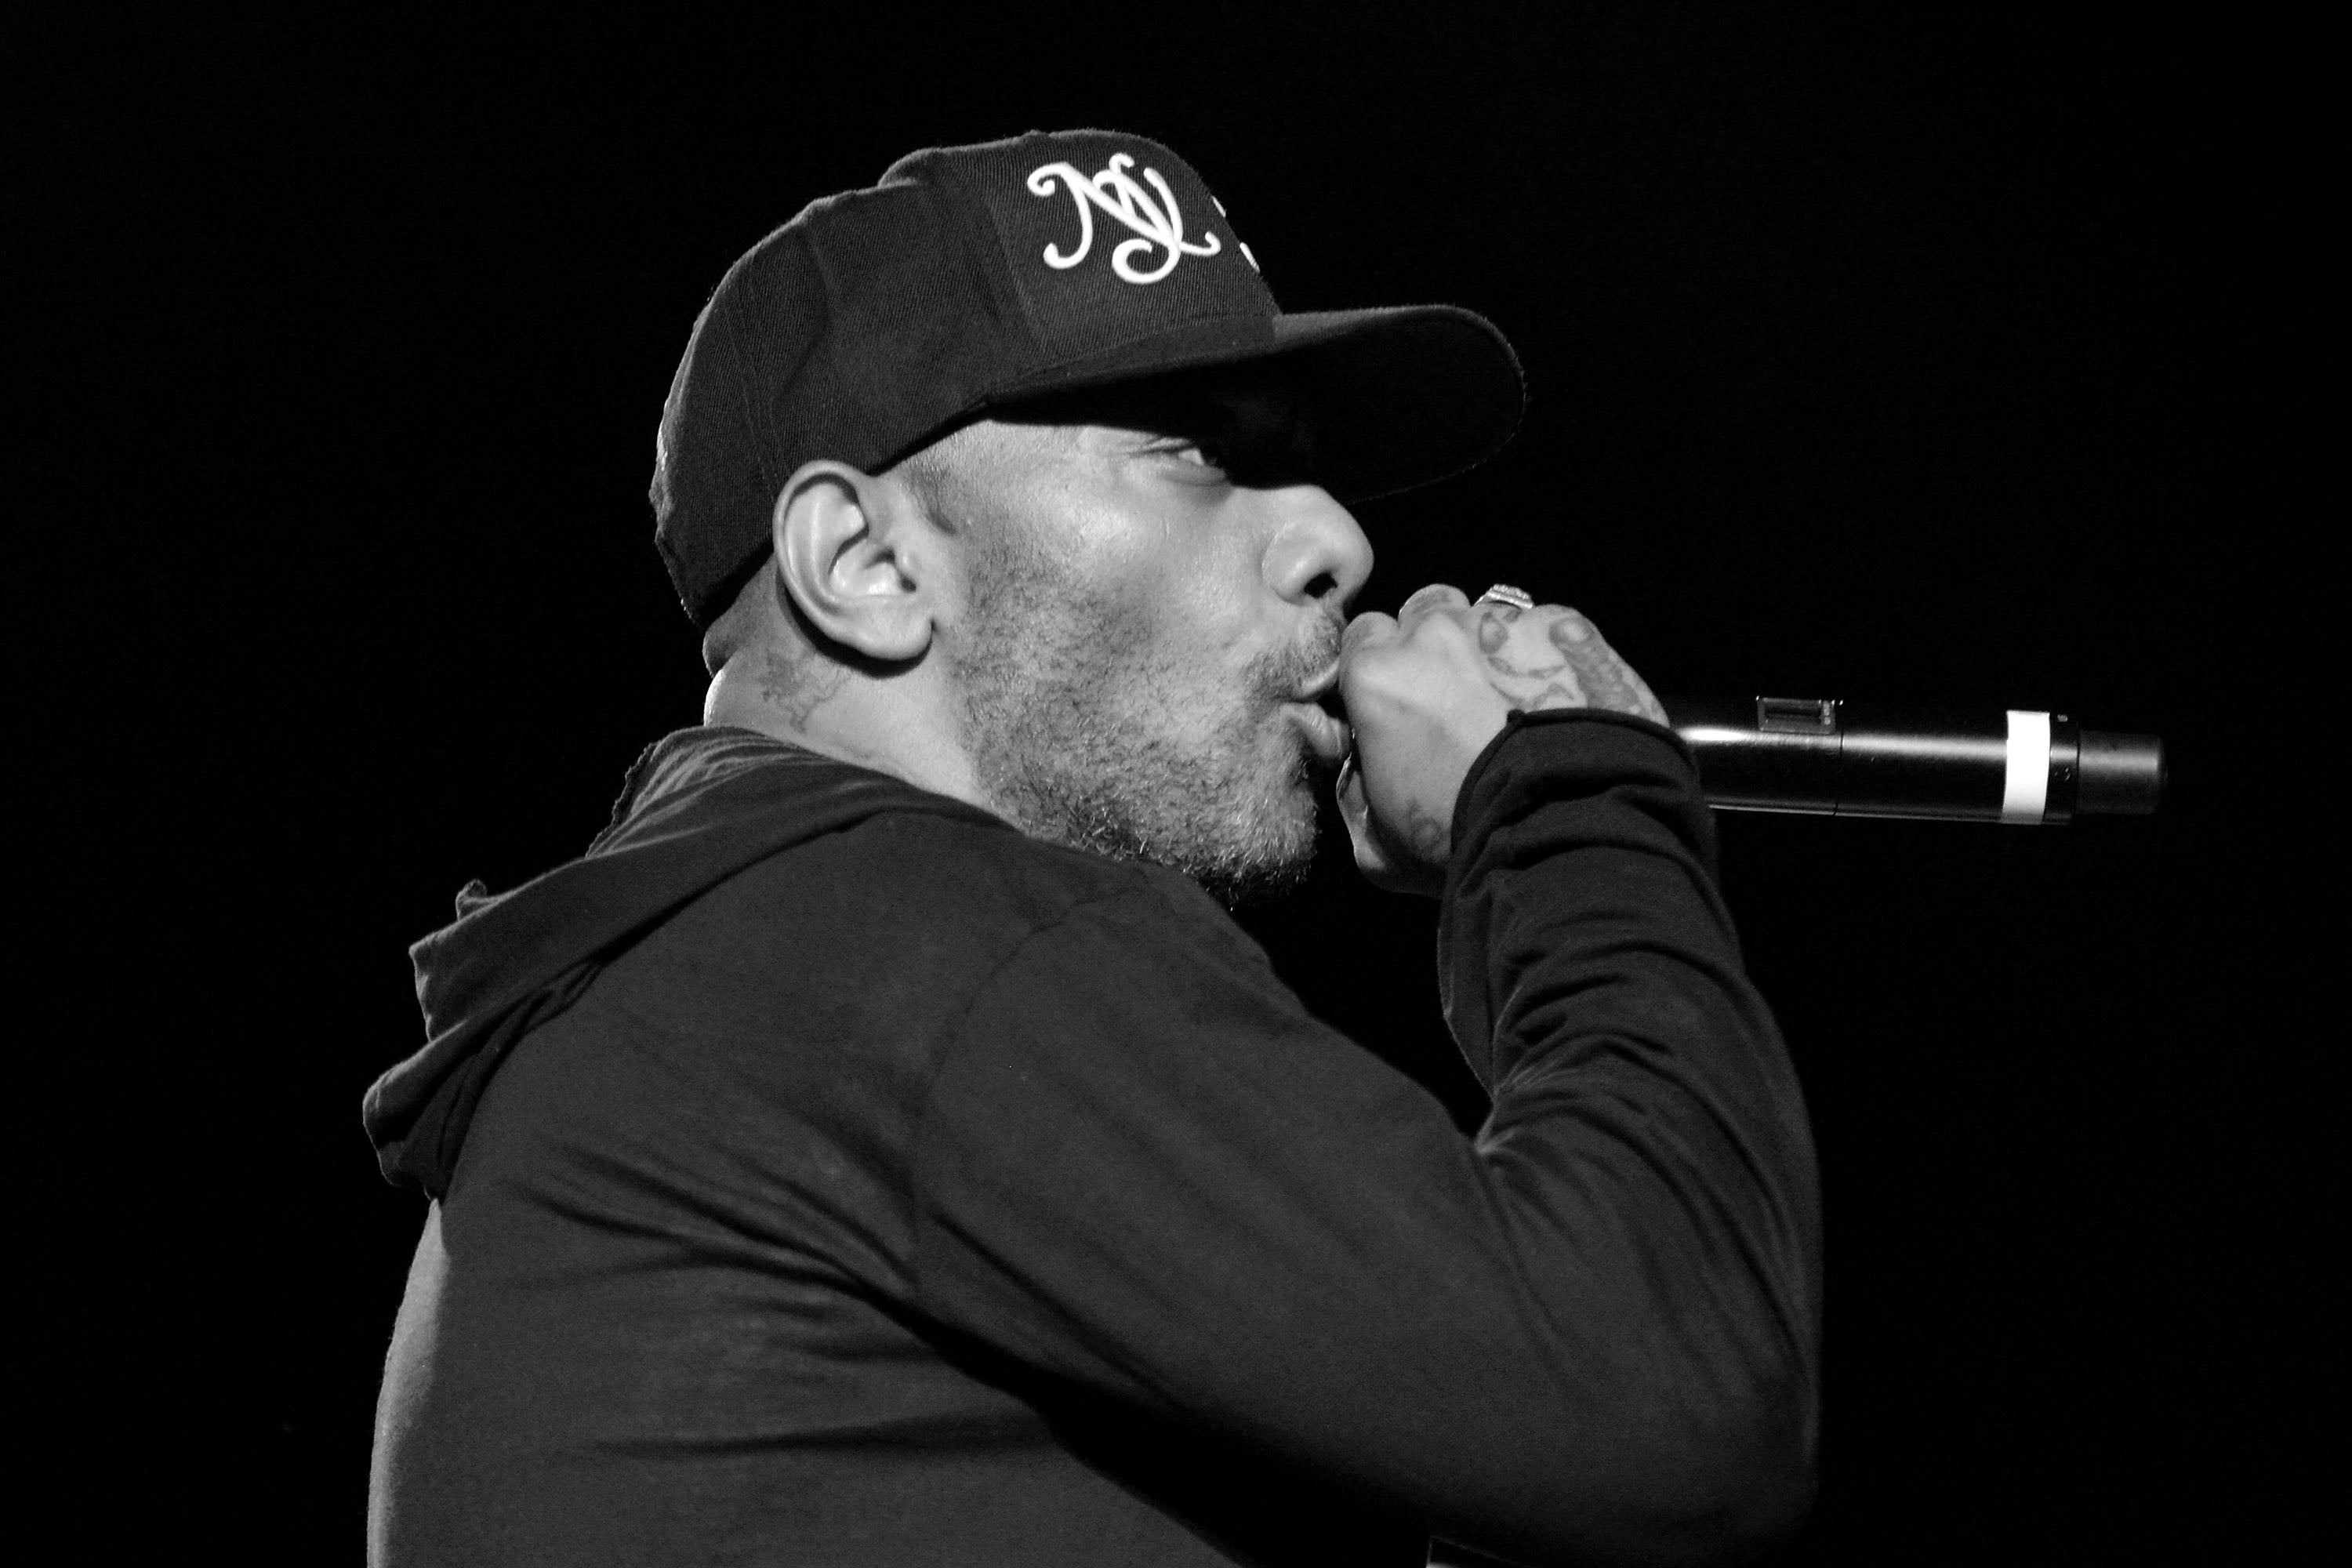 From Hip-Hop To Sickle Cell Awareness, Prodigy's Legacy Is Two-Fold
